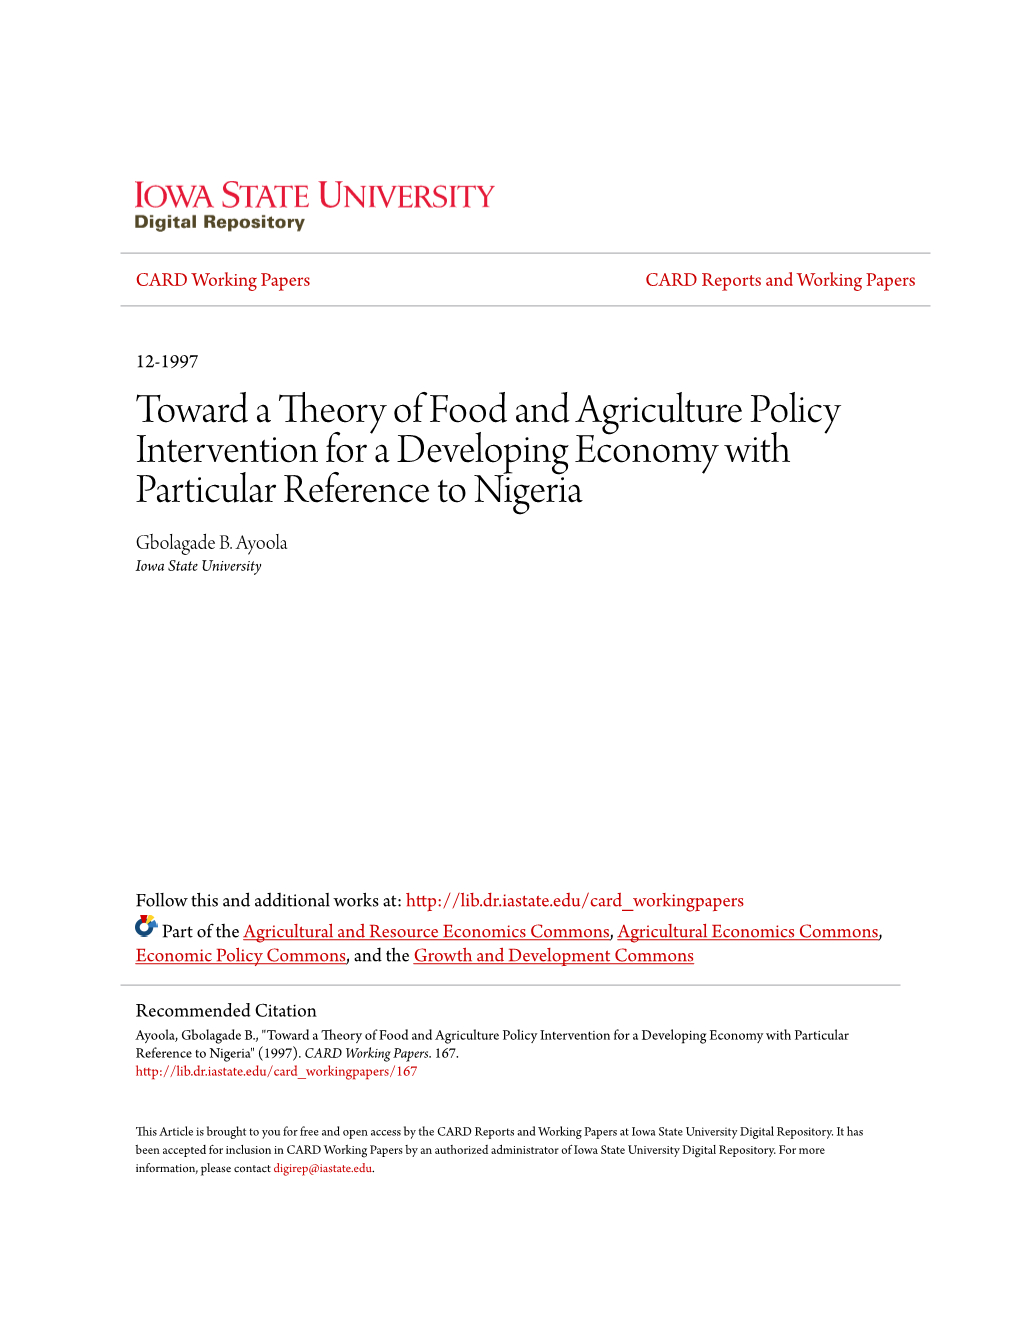 Toward a Theory of Food and Agriculture Policy Intervention for a Developing Economy with Particular Reference to Nigeria Gbolagade B